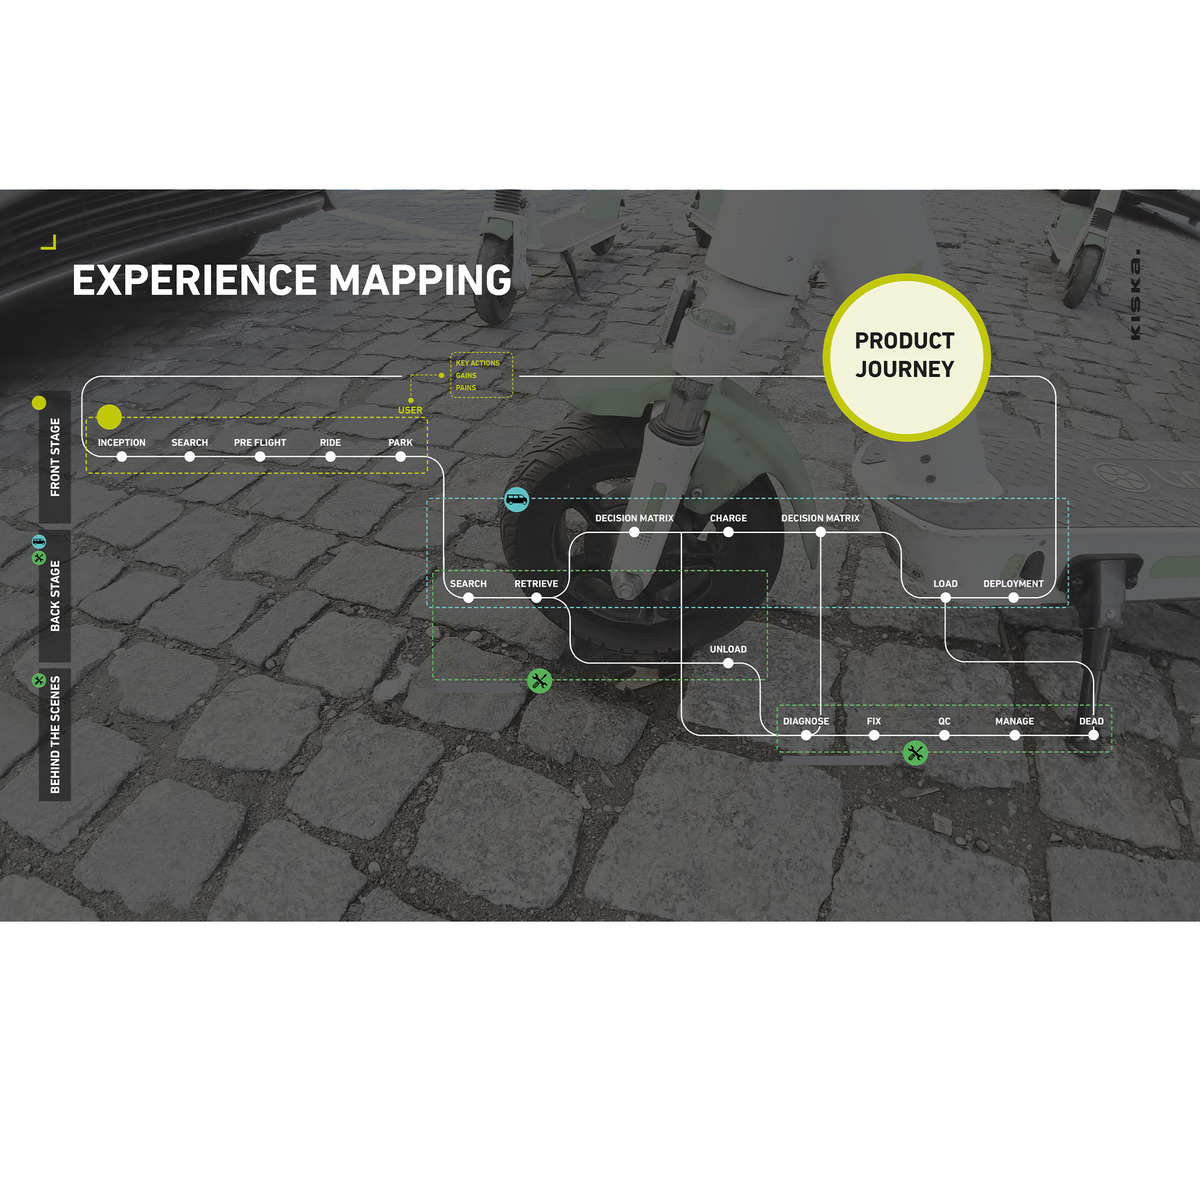 5_Research_Experience_Mapping_product_journey_Square